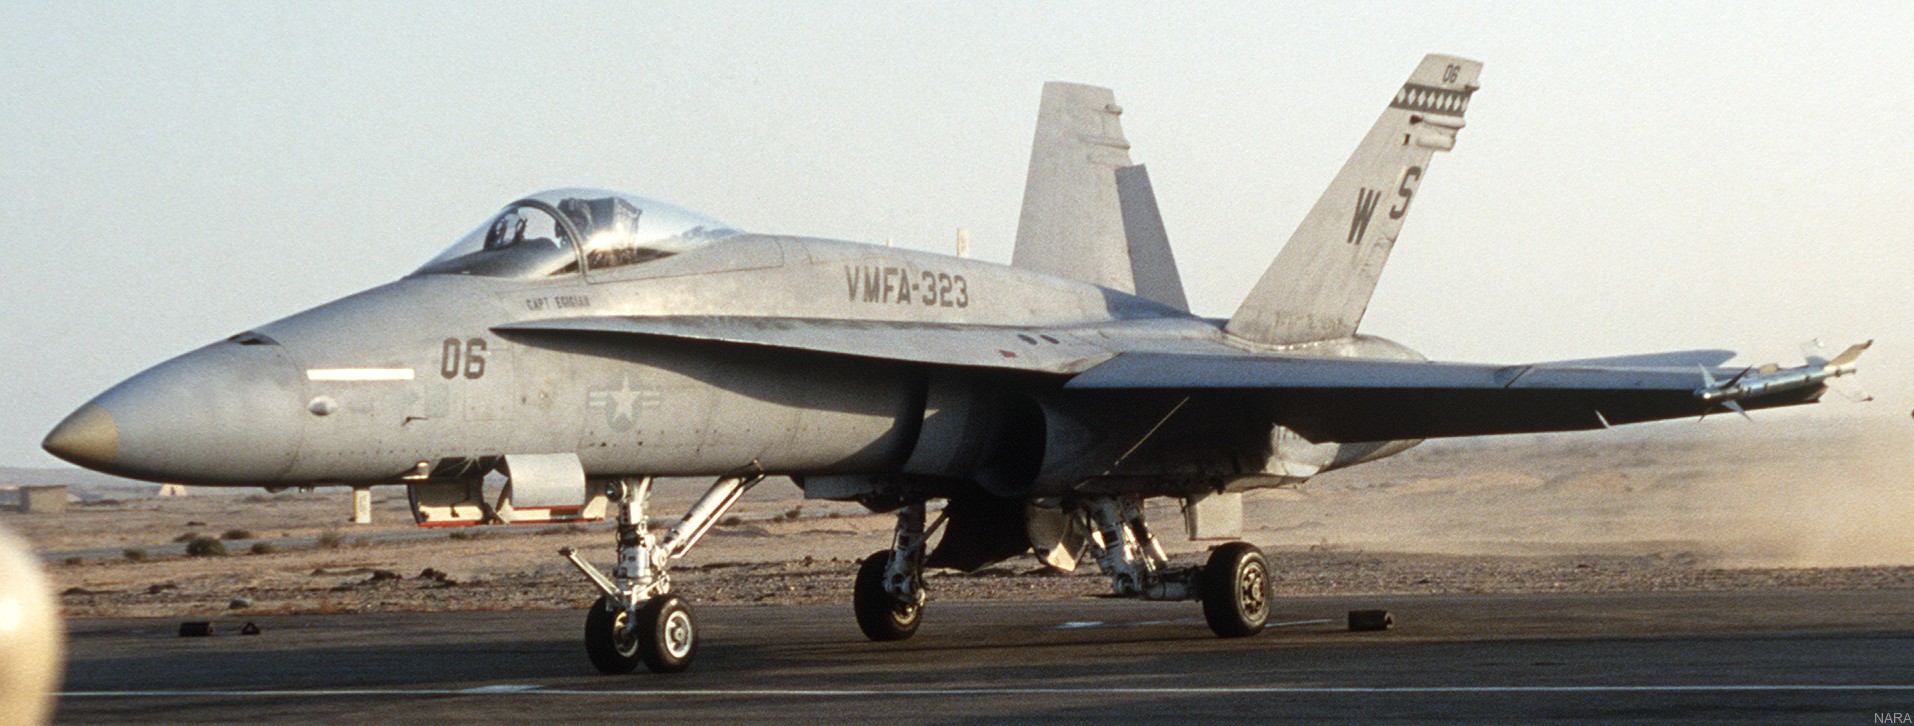 vmfa-323 death rattlers marine fighter attack squadron f/a-18a hornet 180 exercise bright star egypt